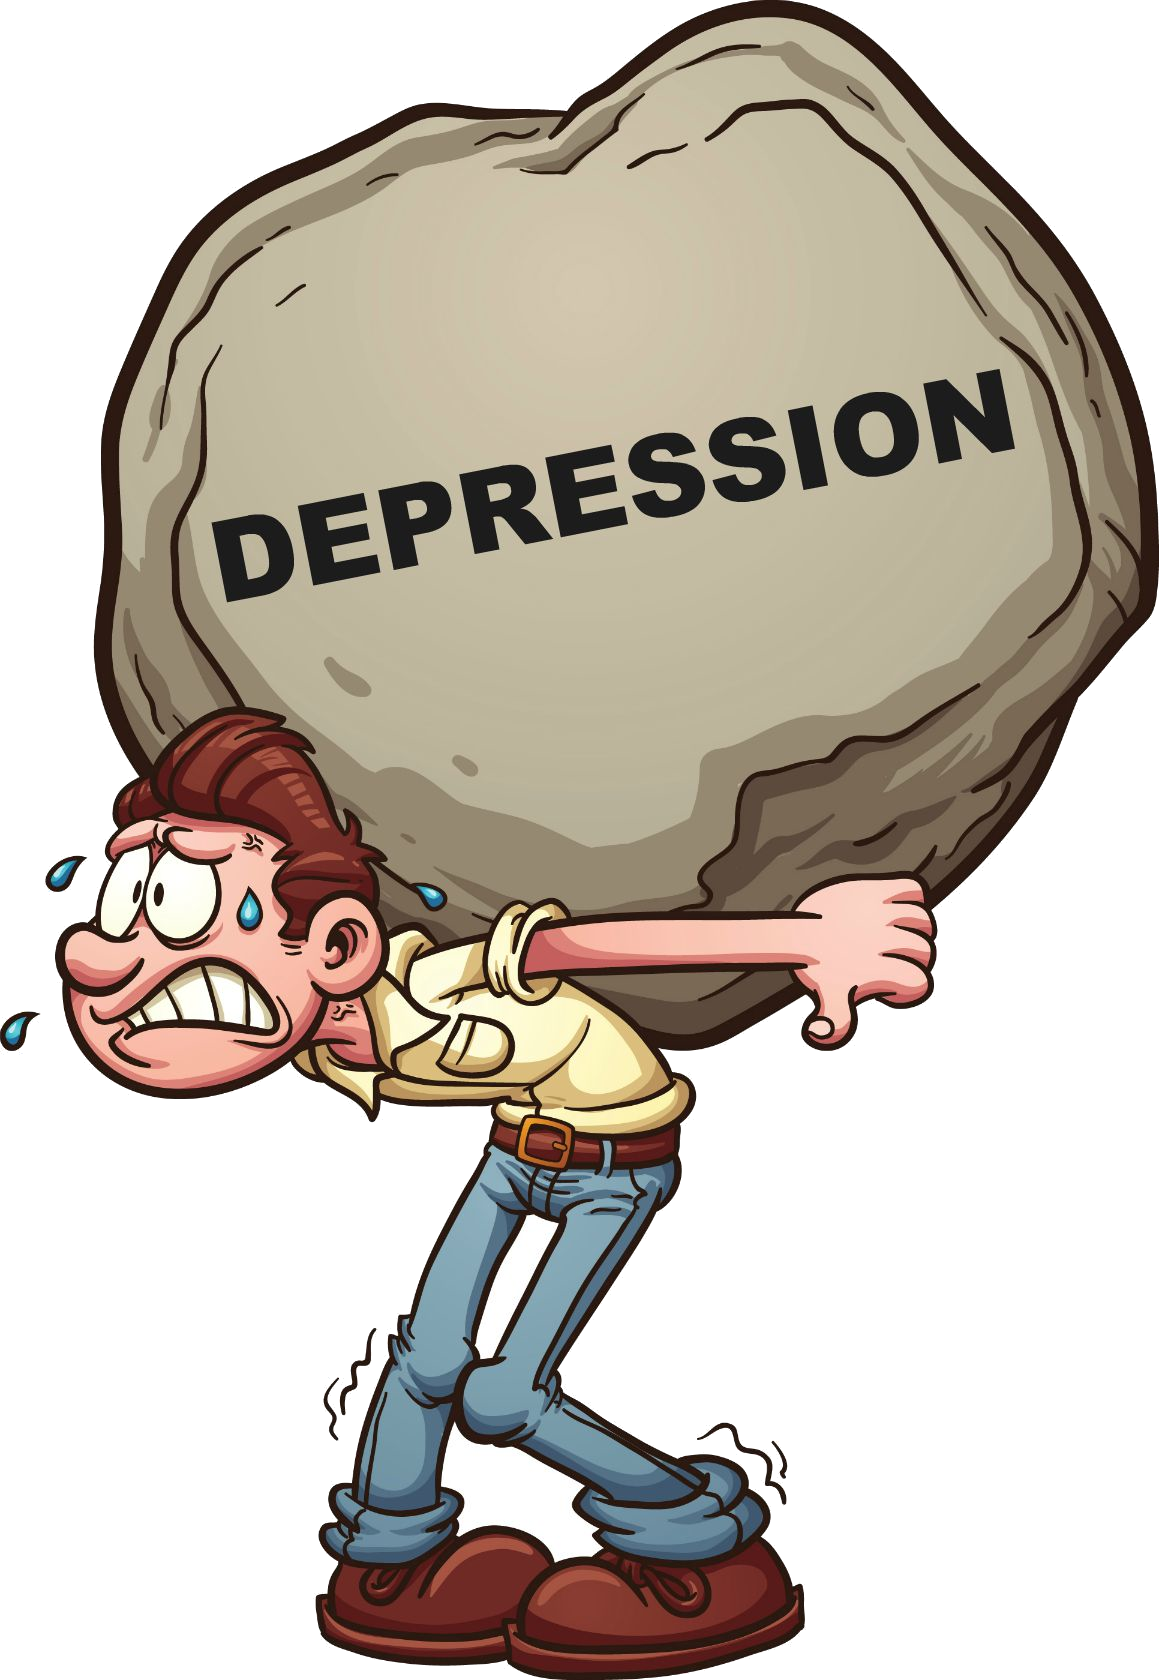 Image depicts a cartoon man carrying a large boulder on his back. The boulder has the word 'depression' written on it. The man is clearly struggling